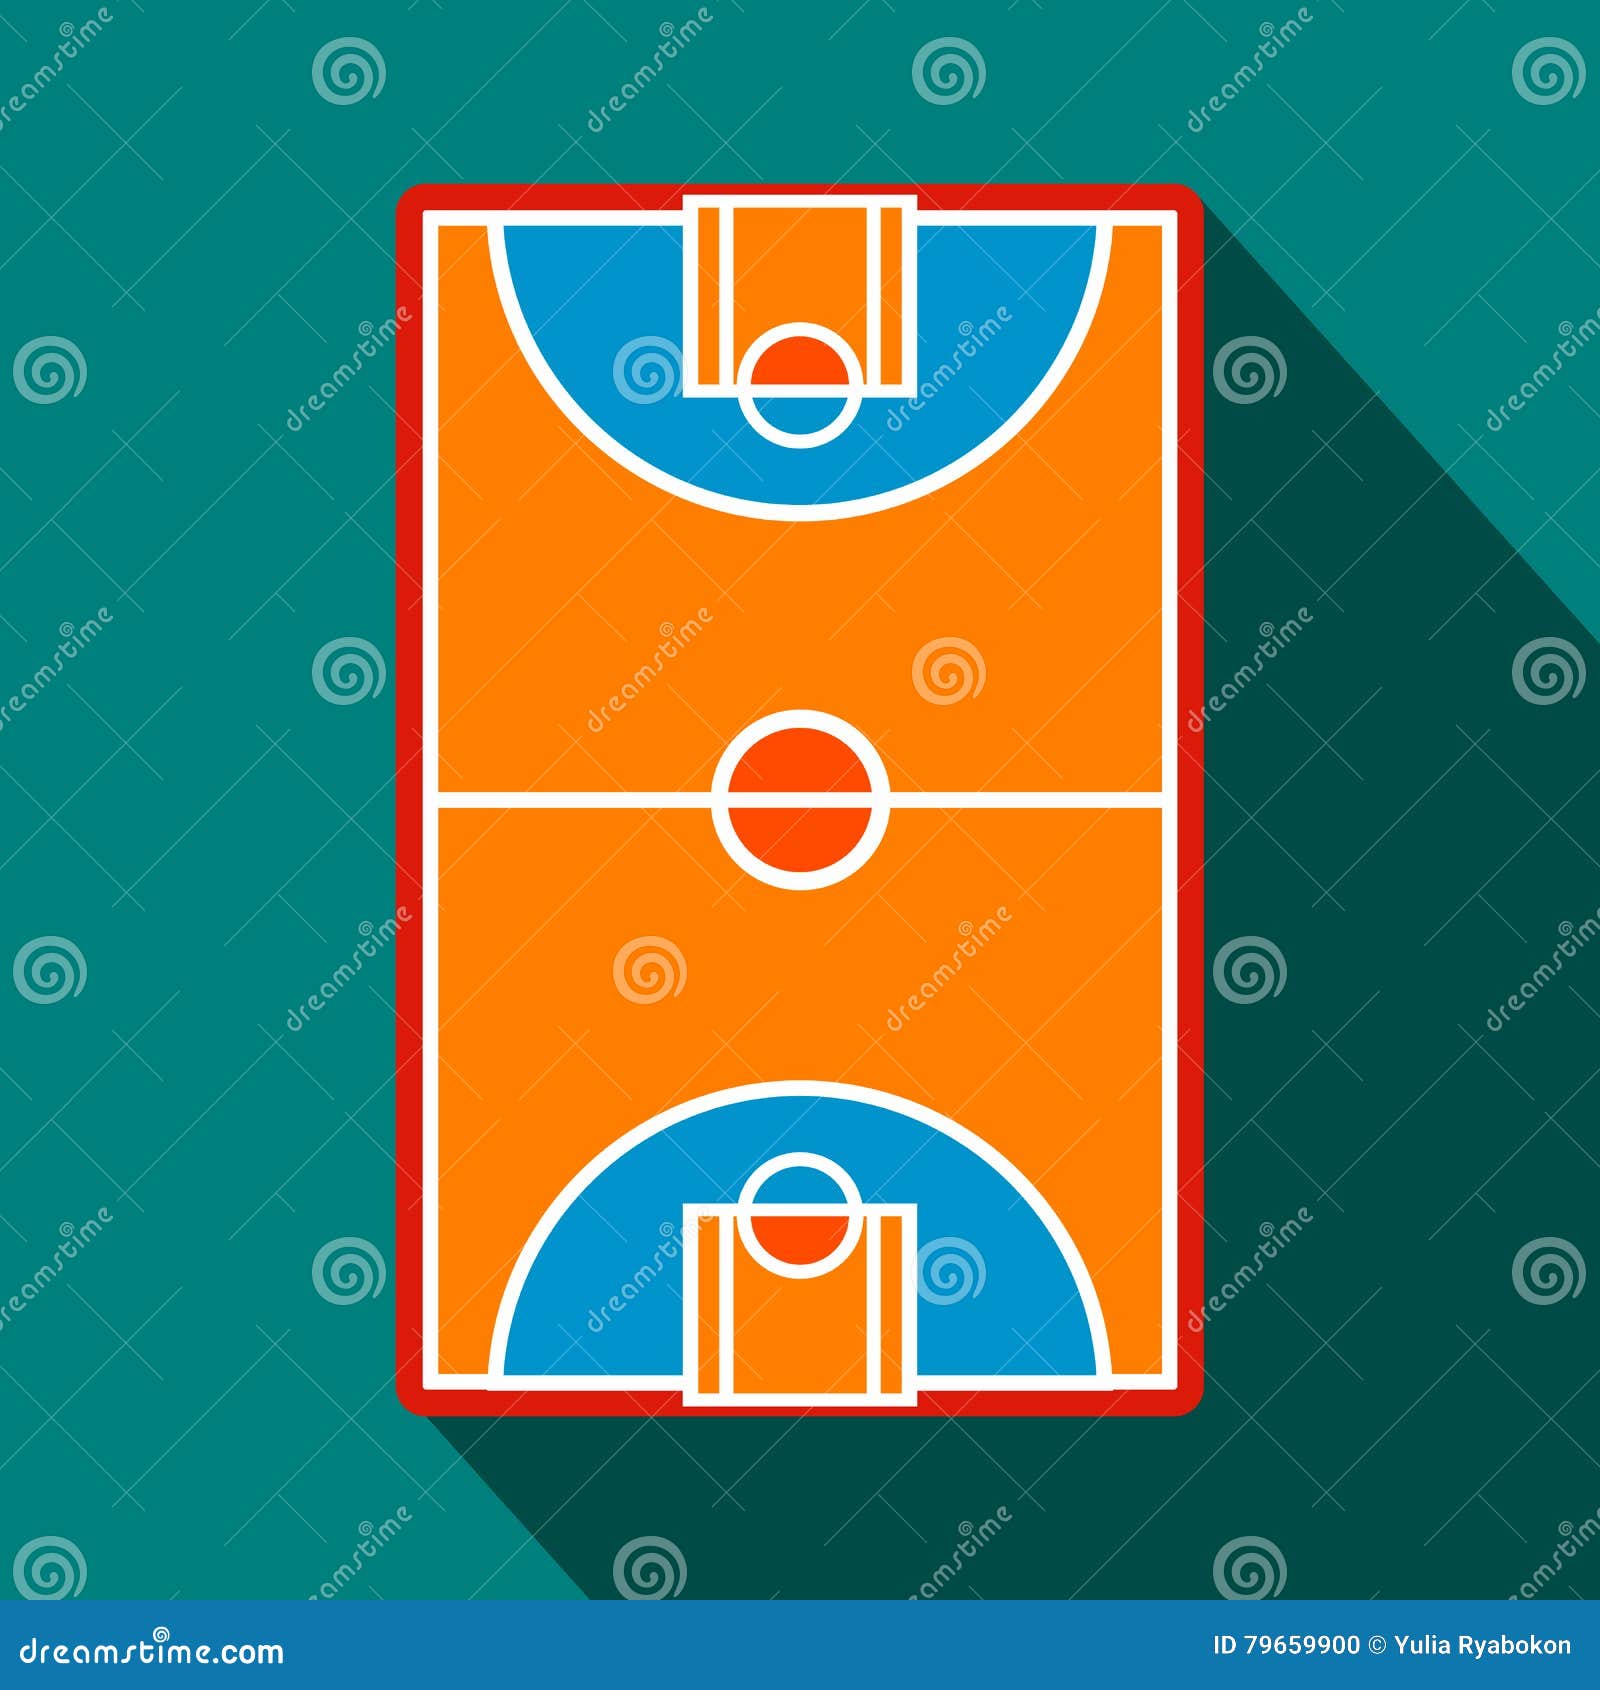 Basketball Court Field Stock Illustrations – 3,960 Basketball Court Field  Stock Illustrations, Vectors & Clipart - Dreamstime